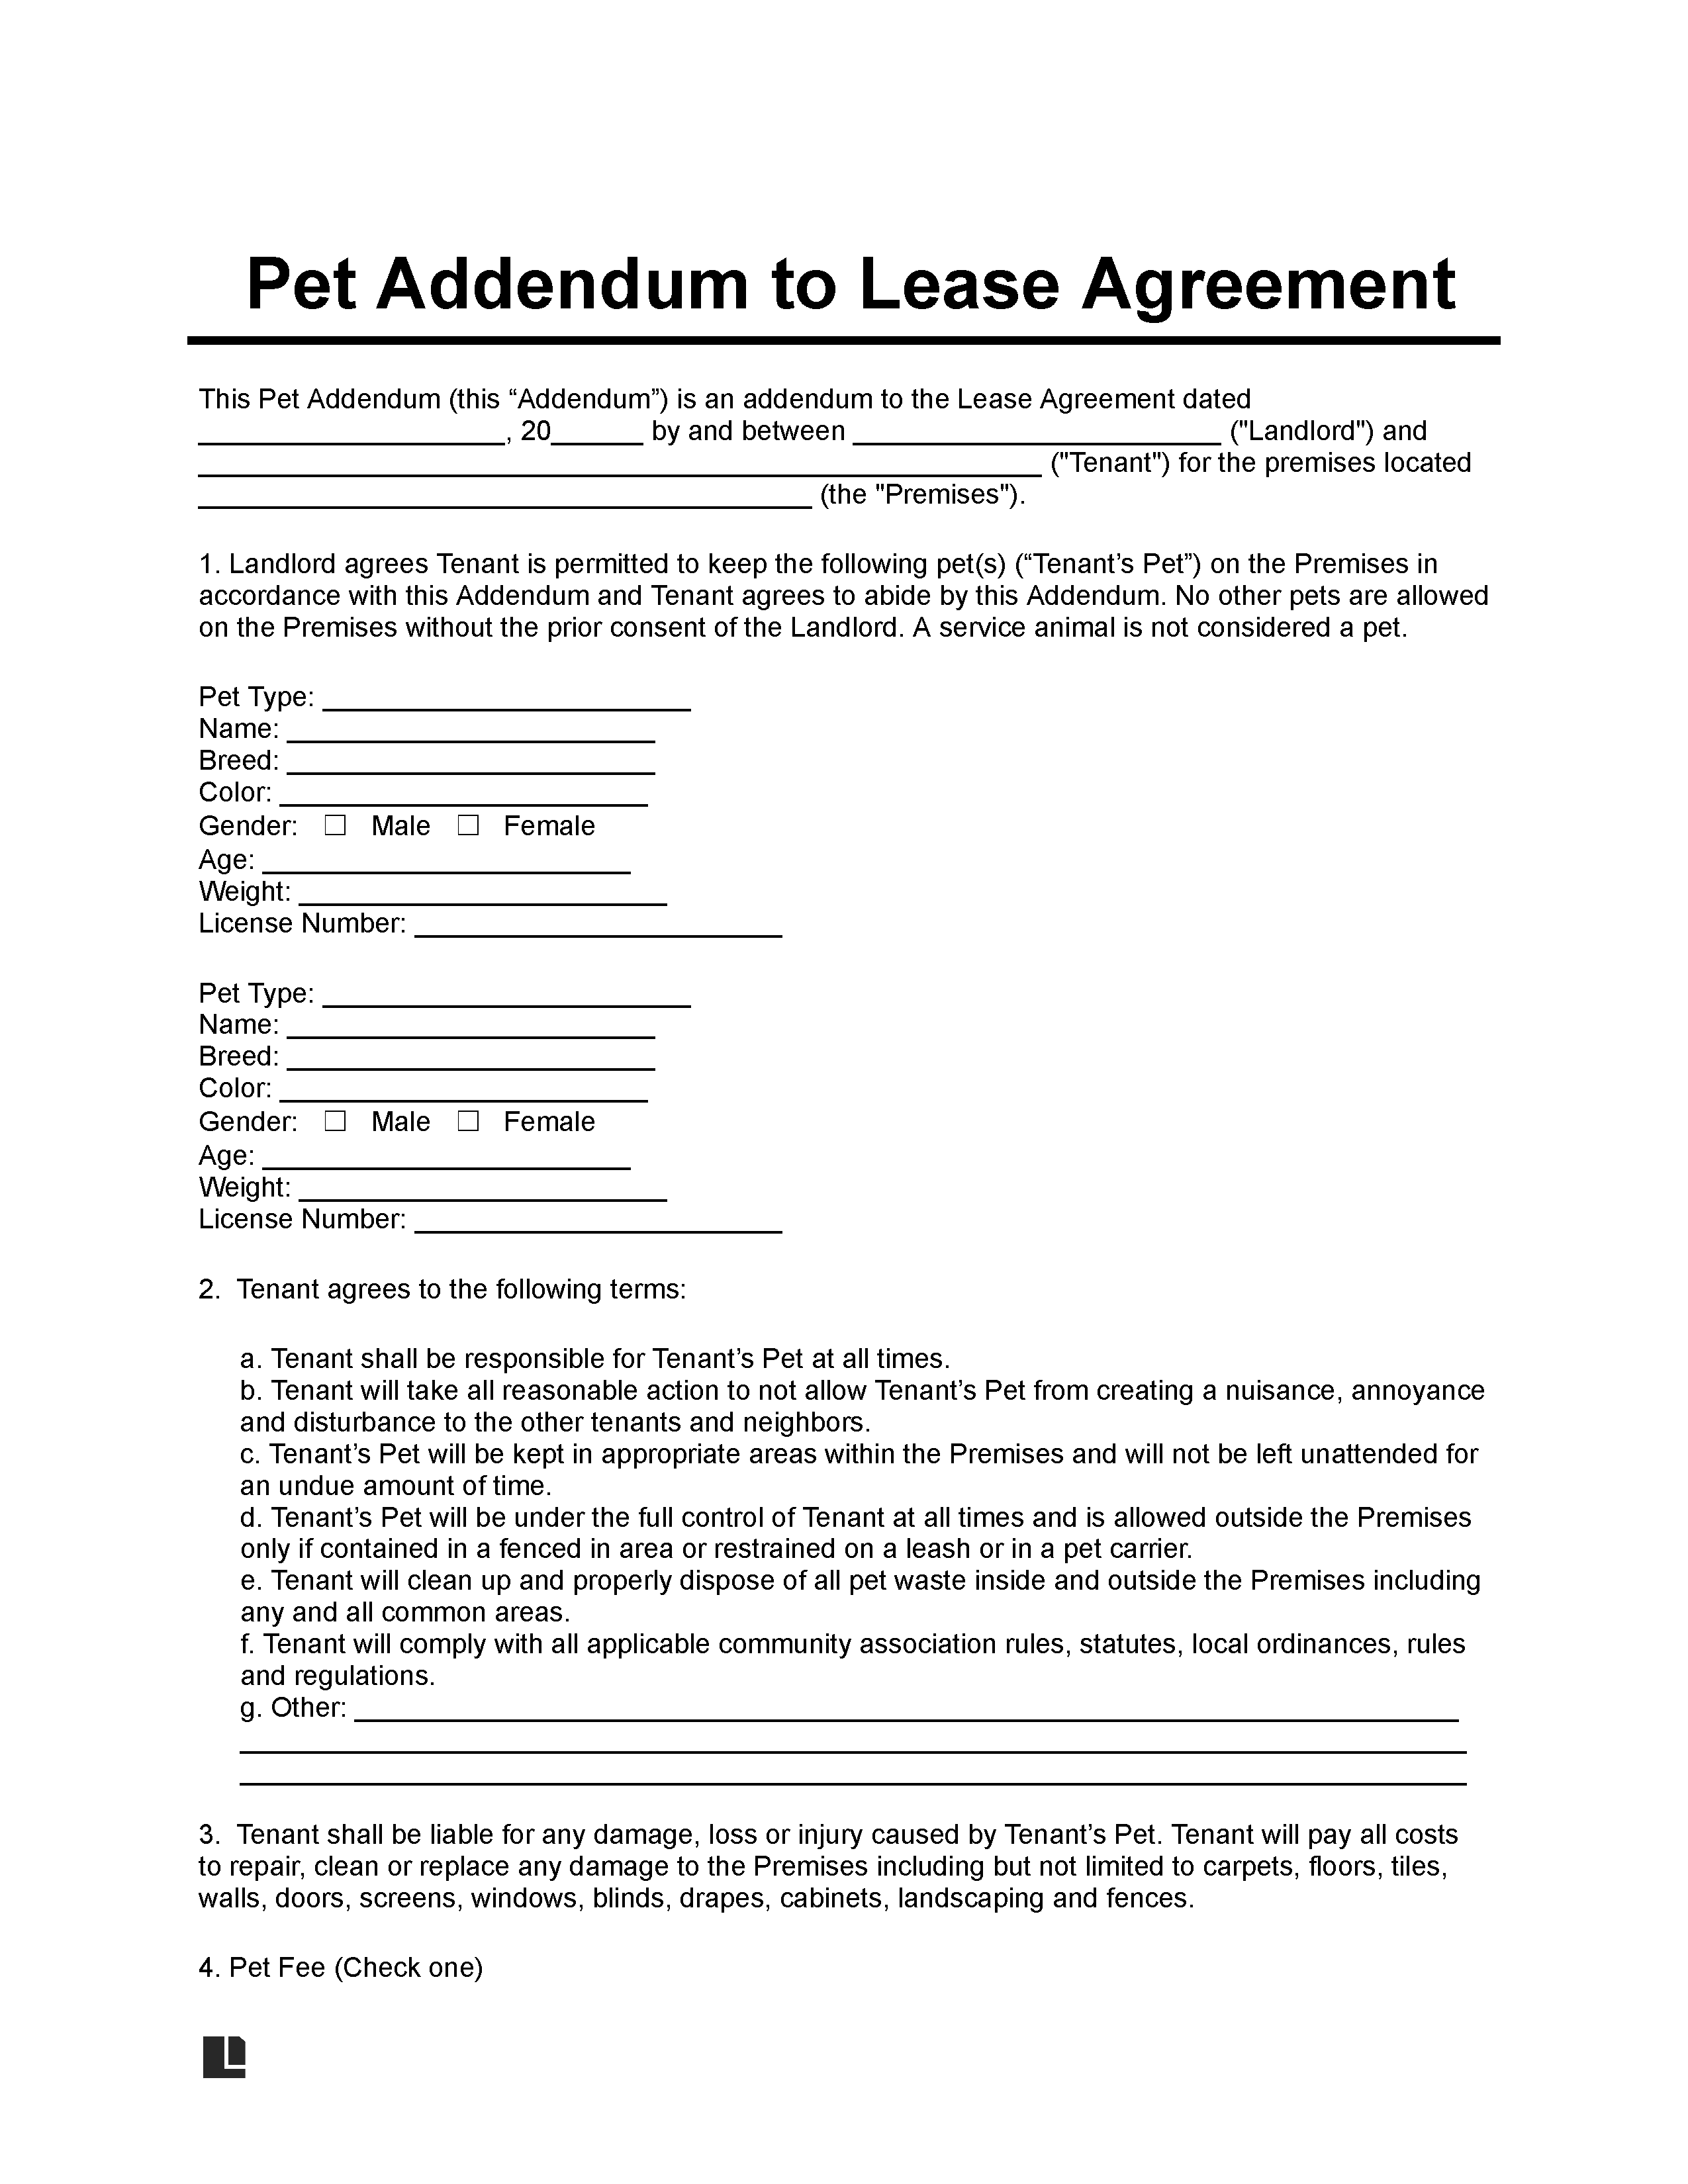 pet addendum to lease agreement template